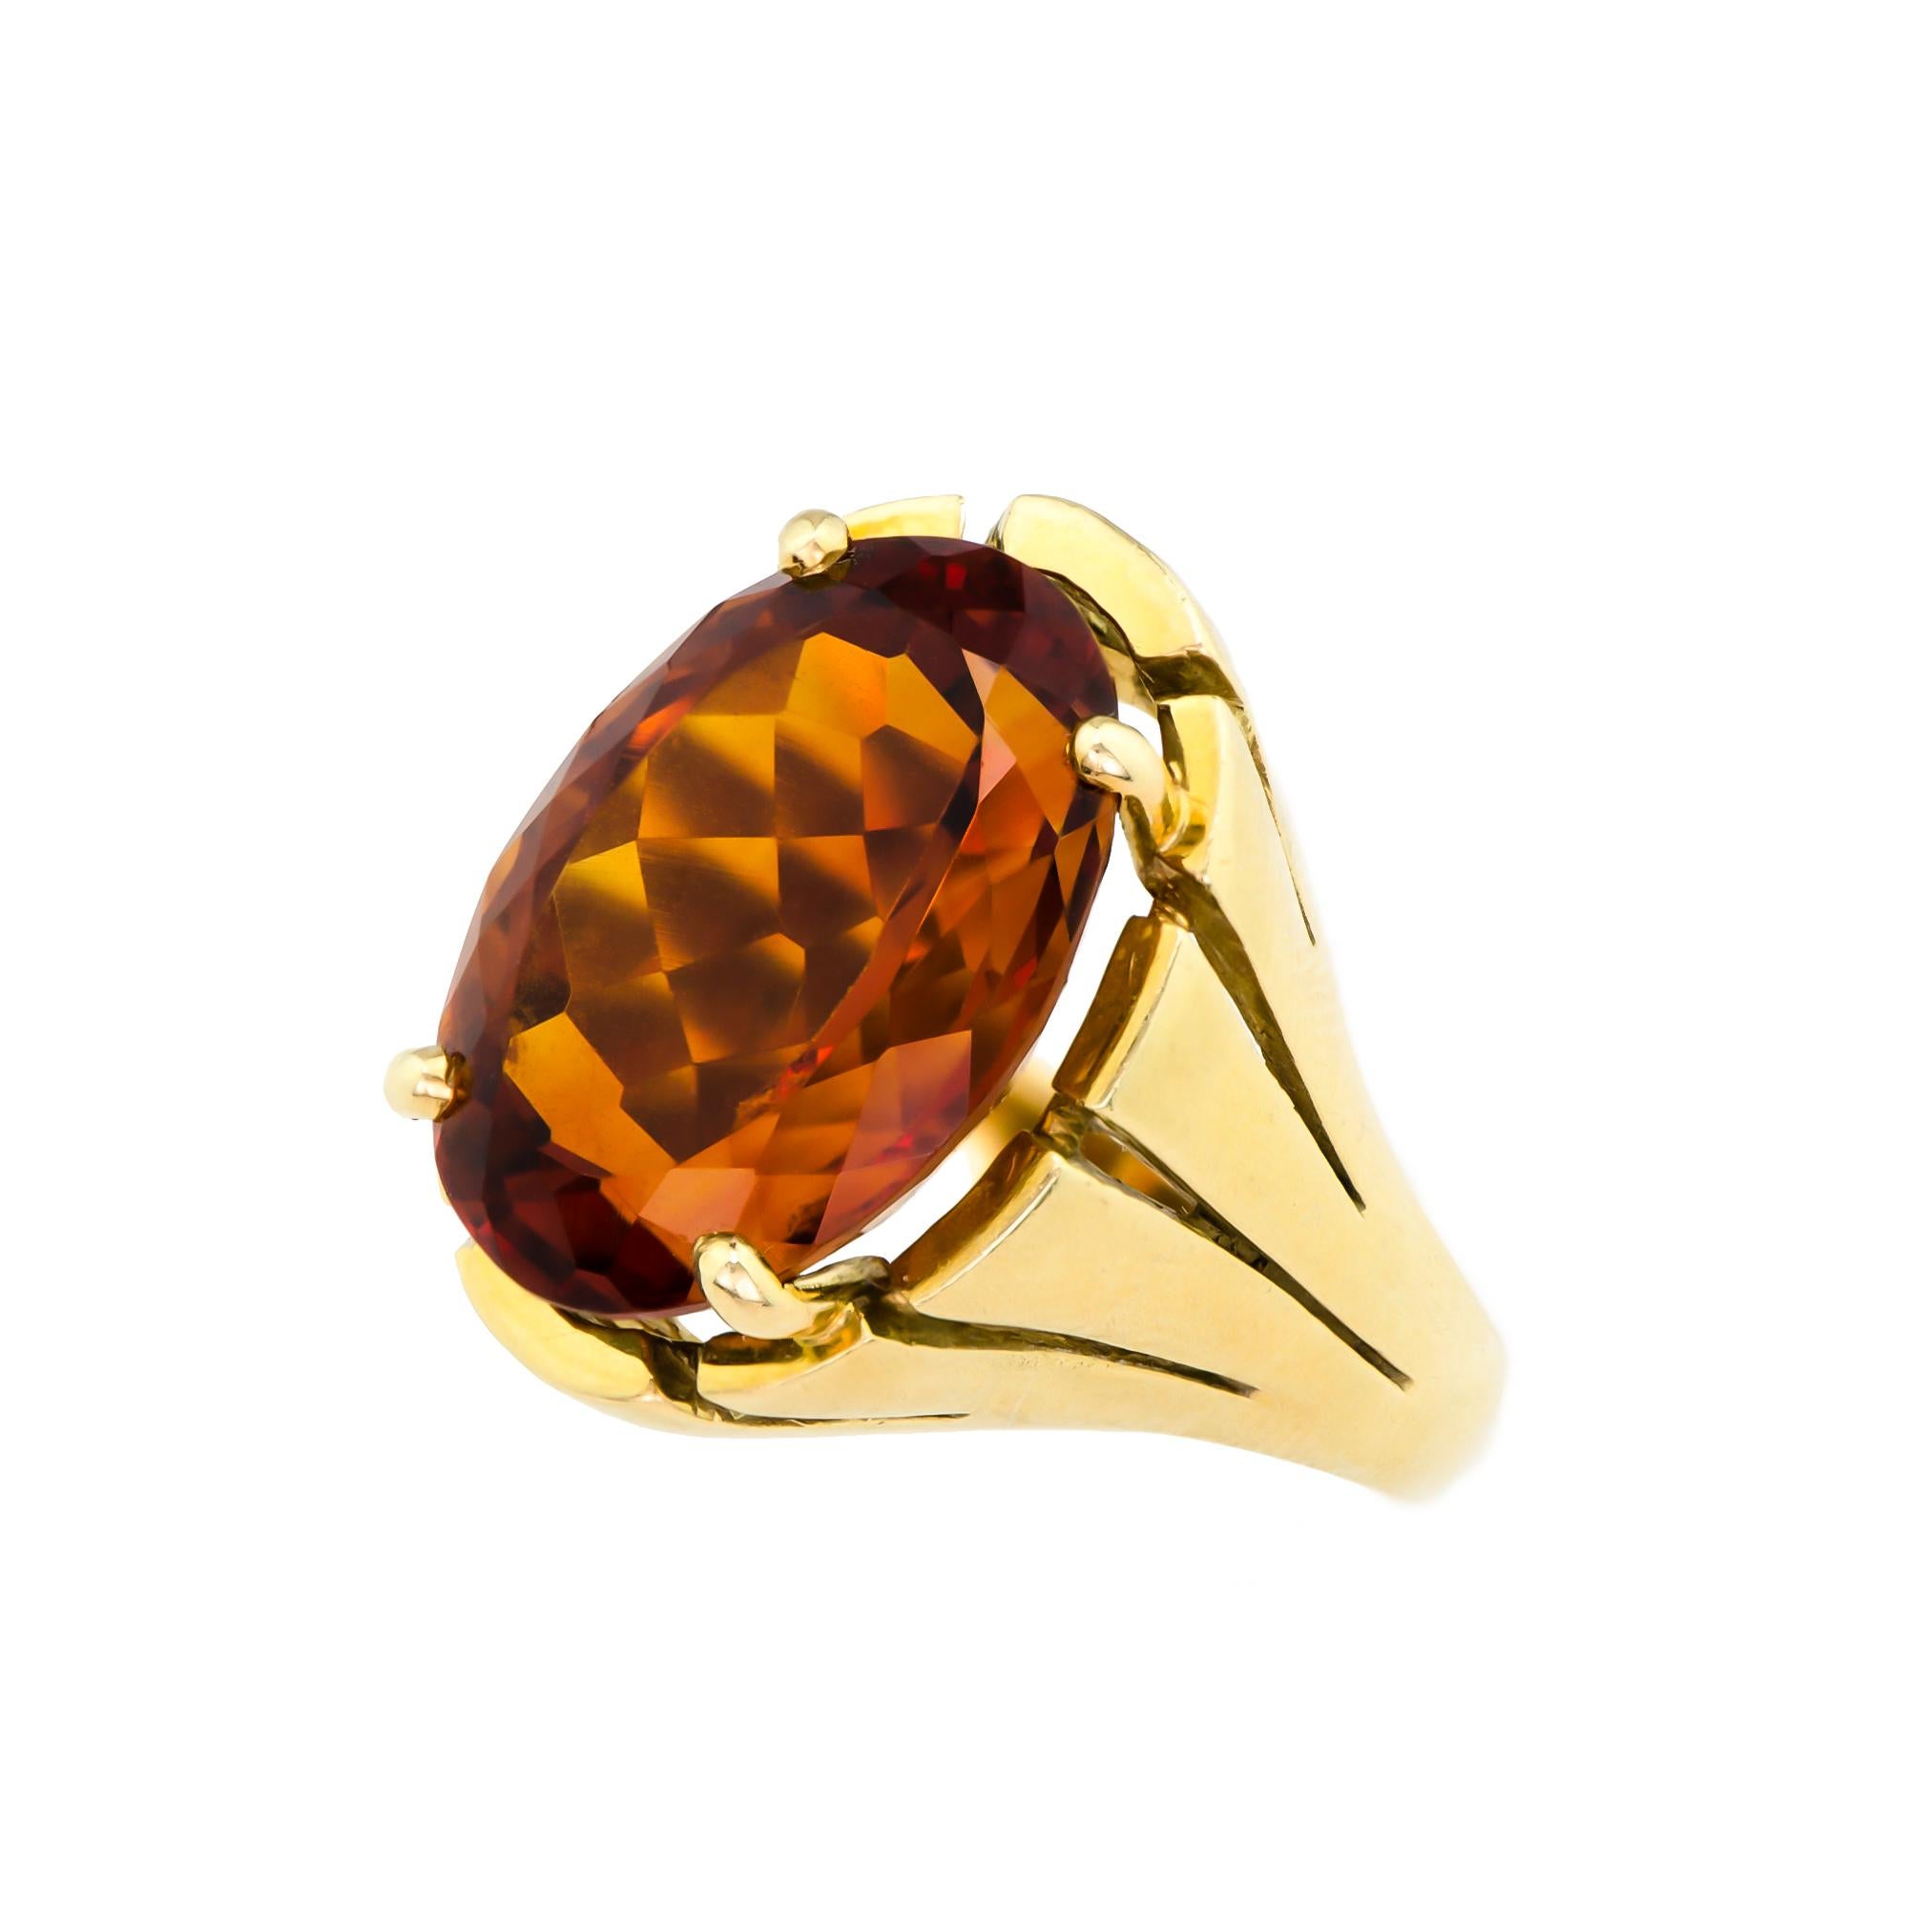 Vintage 18kt yellow gold and citrine ring set with one oval brilliant-cut deep rich colored citrine measures approximately 18.65mm by 13.1mm by 10mm into a heavy 18kt yellow gold mount. Approximately 12.95cts are estimated by formula.

Ring Size: